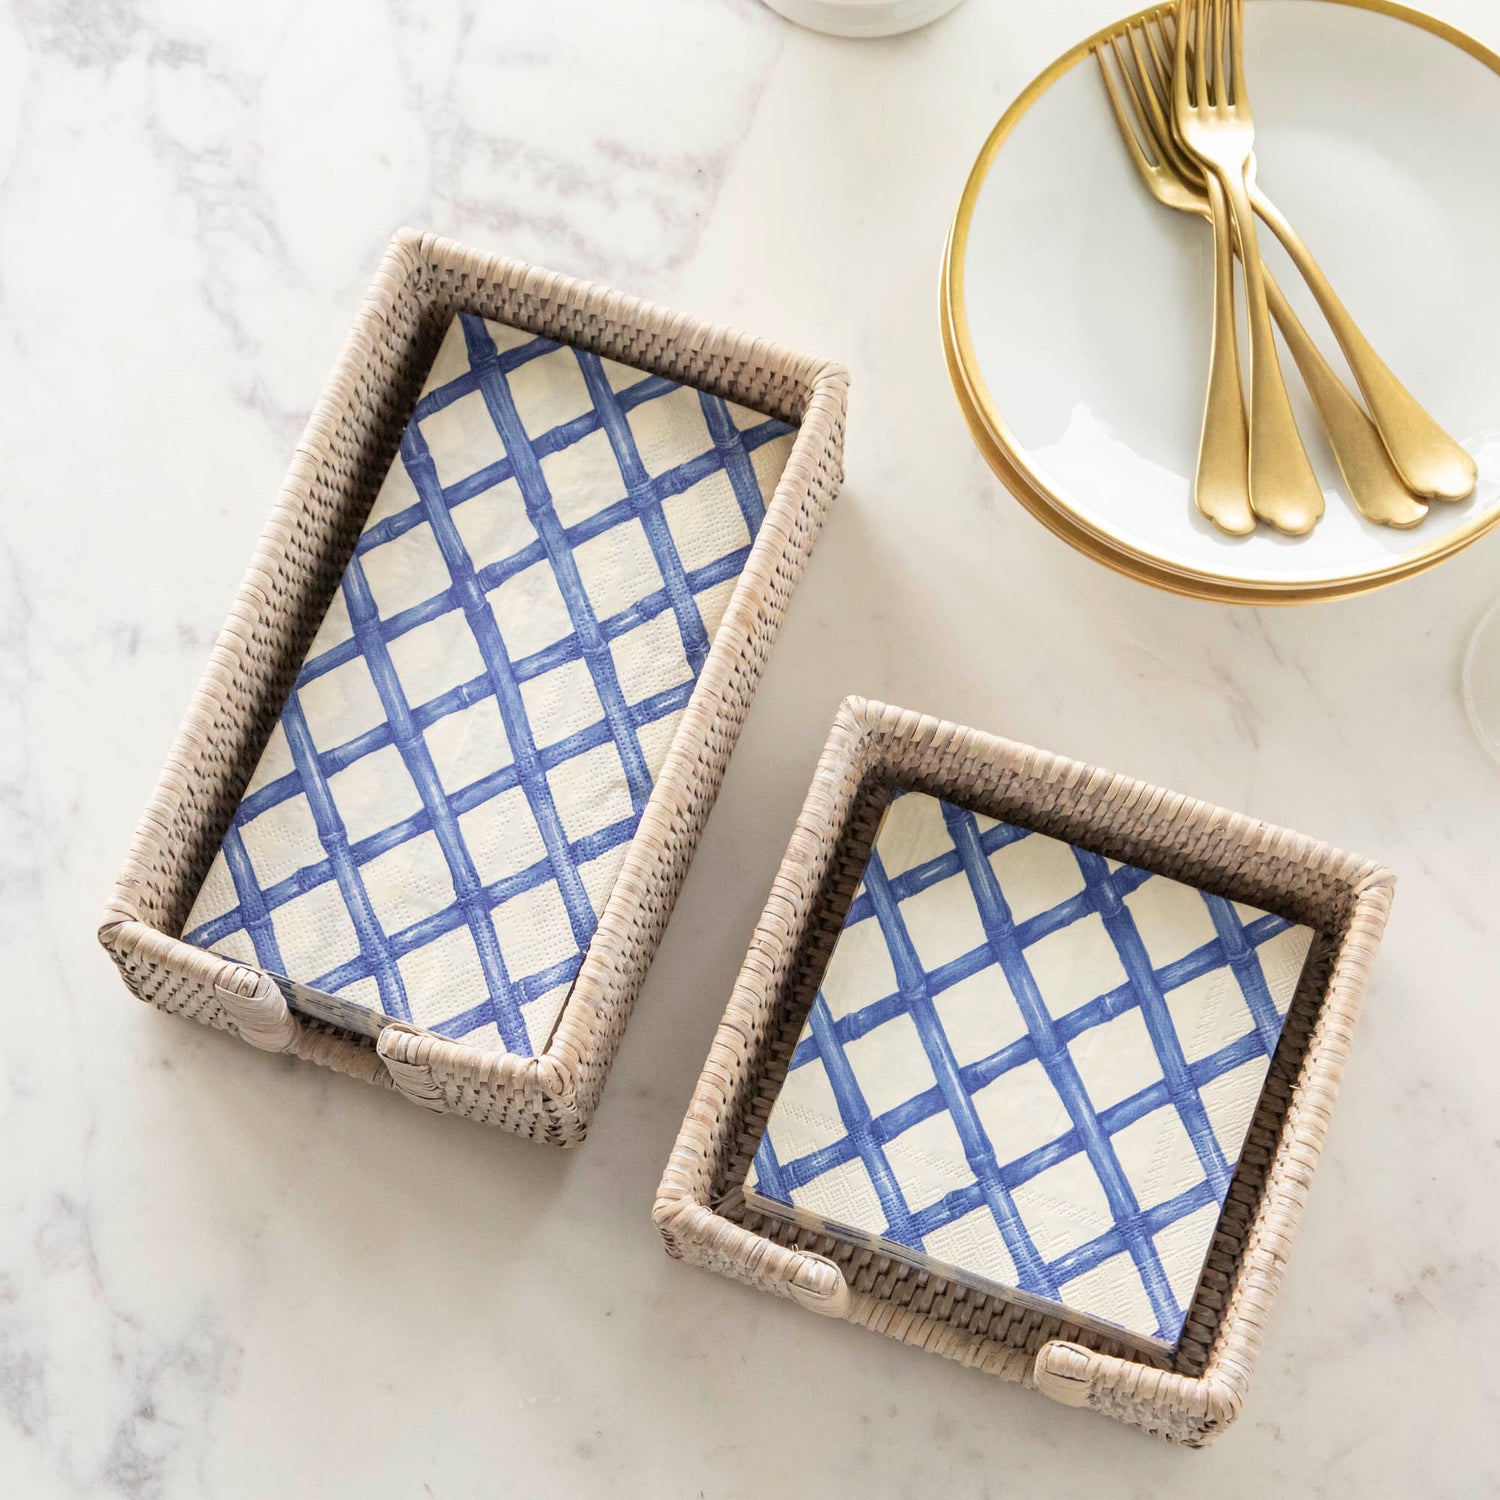 A stack of Blue Lattice Guest Napkins and a stack of Blue Lattice Cocktail Napkins in wicker napkin holders, next to a stack of plates with gold forks.